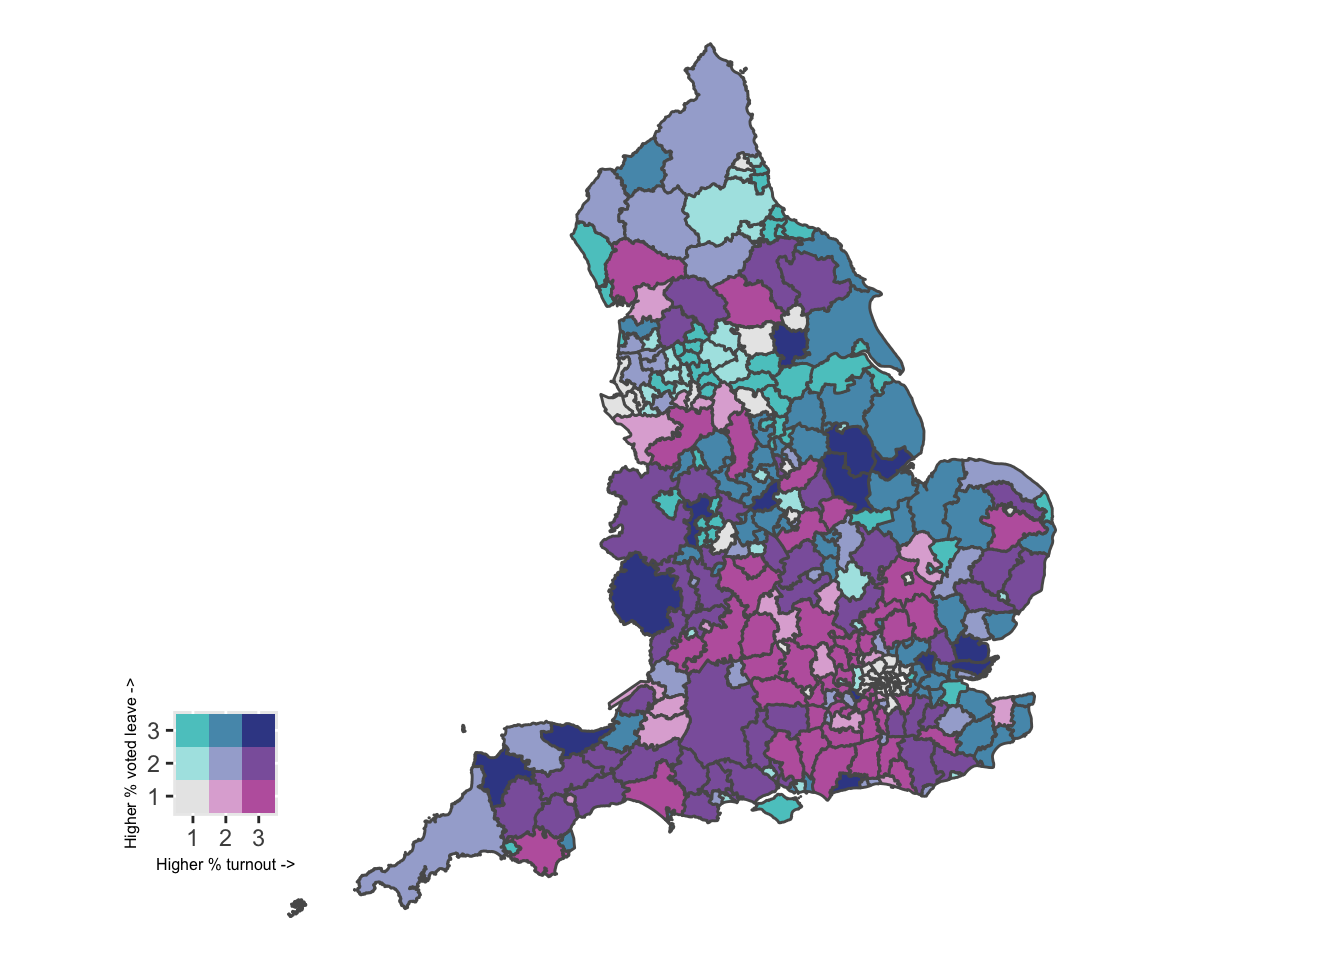 A map of England broken into shaded Local Authorities. The previous figure is present as a legend to the left. Much of the south and southwest is shaded in pink and purple. Blue and cyan appears more in the northeast.